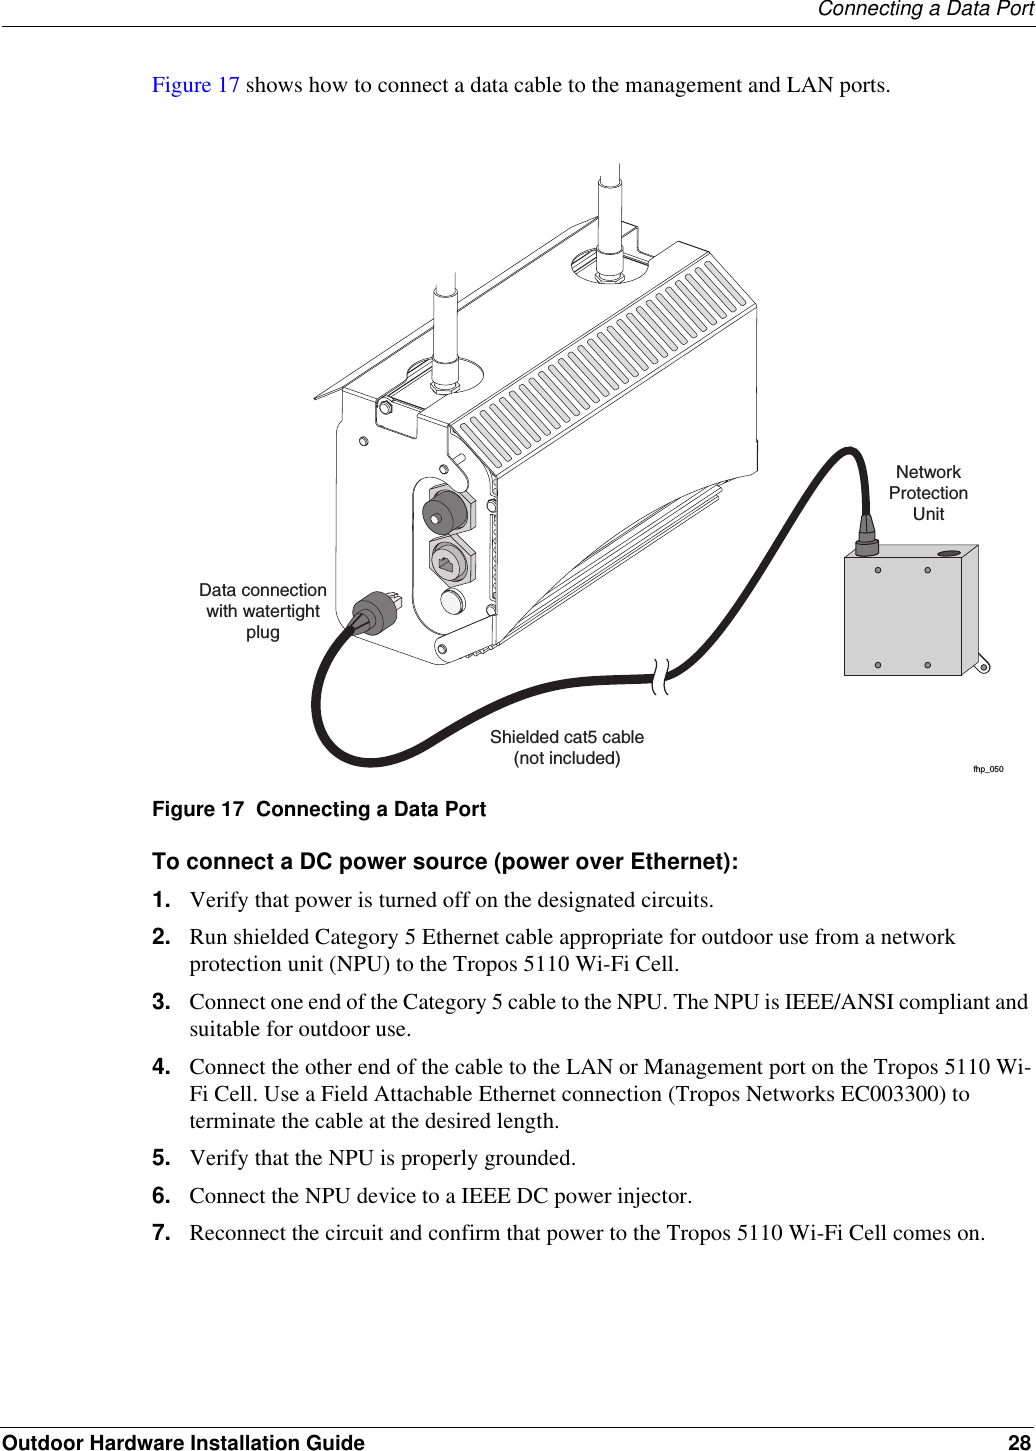 Connecting a Data PortOutdoor Hardware Installation Guide 28Figure 17 shows how to connect a data cable to the management and LAN ports. Figure 17  Connecting a Data PortTo connect a DC power source (power over Ethernet):1. Verify that power is turned off on the designated circuits.2. Run shielded Category 5 Ethernet cable appropriate for outdoor use from a network protection unit (NPU) to the Tropos 5110 Wi-Fi Cell.3. Connect one end of the Category 5 cable to the NPU. The NPU is IEEE/ANSI compliant and suitable for outdoor use.4. Connect the other end of the cable to the LAN or Management port on the Tropos 5110 Wi-Fi Cell. Use a Field Attachable Ethernet connection (Tropos Networks EC003300) to terminate the cable at the desired length.5. Verify that the NPU is properly grounded.6. Connect the NPU device to a IEEE DC power injector.7. Reconnect the circuit and confirm that power to the Tropos 5110 Wi-Fi Cell comes on.fhp_050Shielded cat5 cable(not included)Data connectionwith watertightplugNetworkProtectionUnitfhp_050Shielded cat5 cable(not included)Data connectionwith watertightplugNetworkProtectionUnit